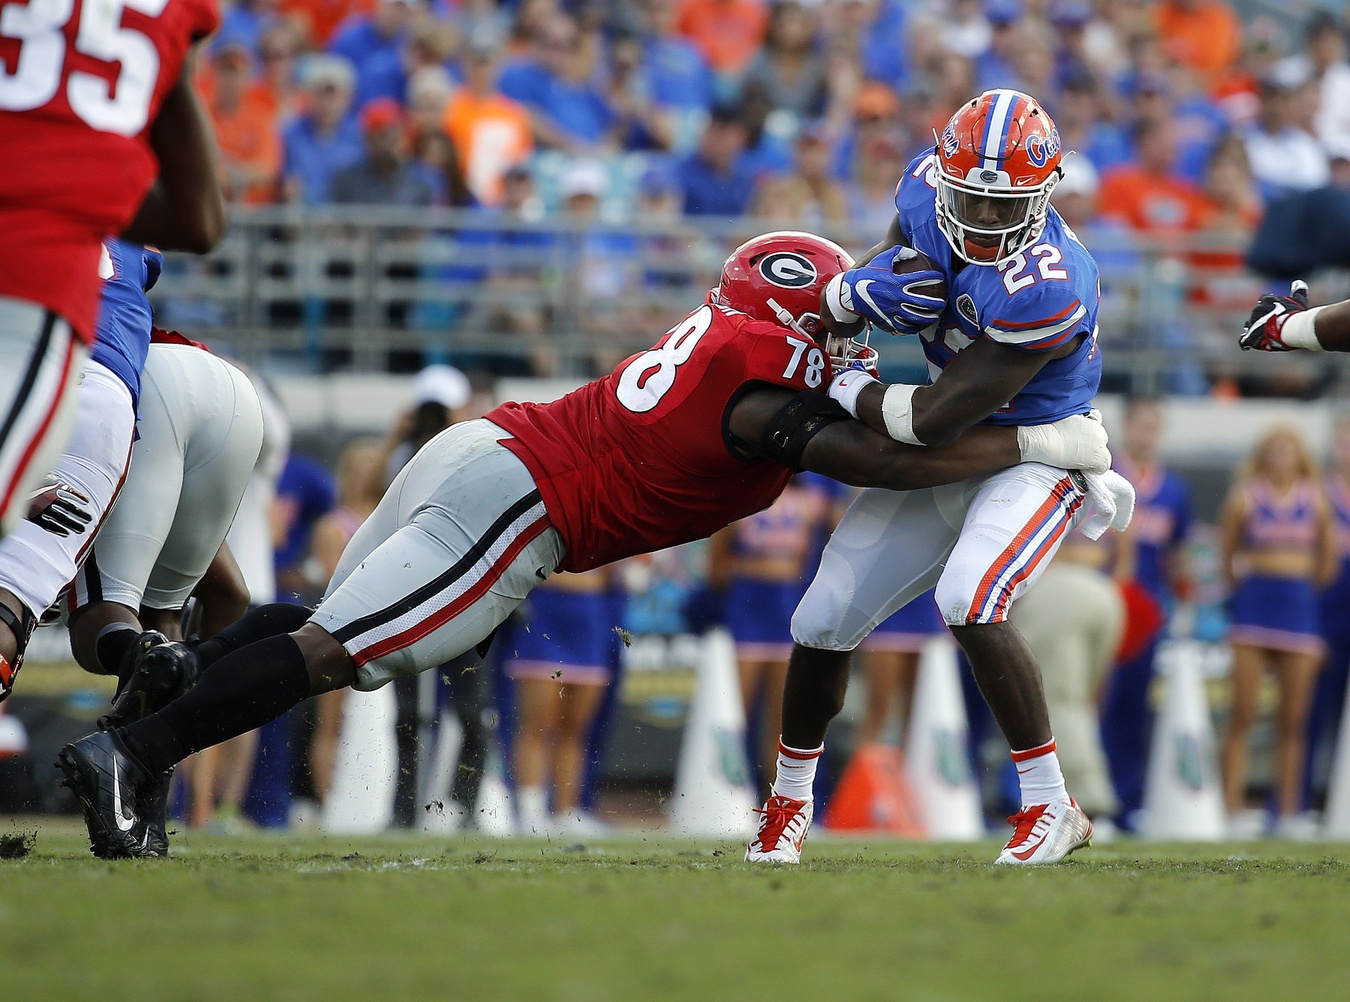 Oct 29, 2016; Jacksonville, FL, USA; Florida Gators running back Lamical Perine (22) runs with the ball as Georgia Bulldogs defensive tackle Trenton Thompson (78) defends during the first half at EverBank Field. Mandatory Credit: Kim Klement-USA TODAY Sports